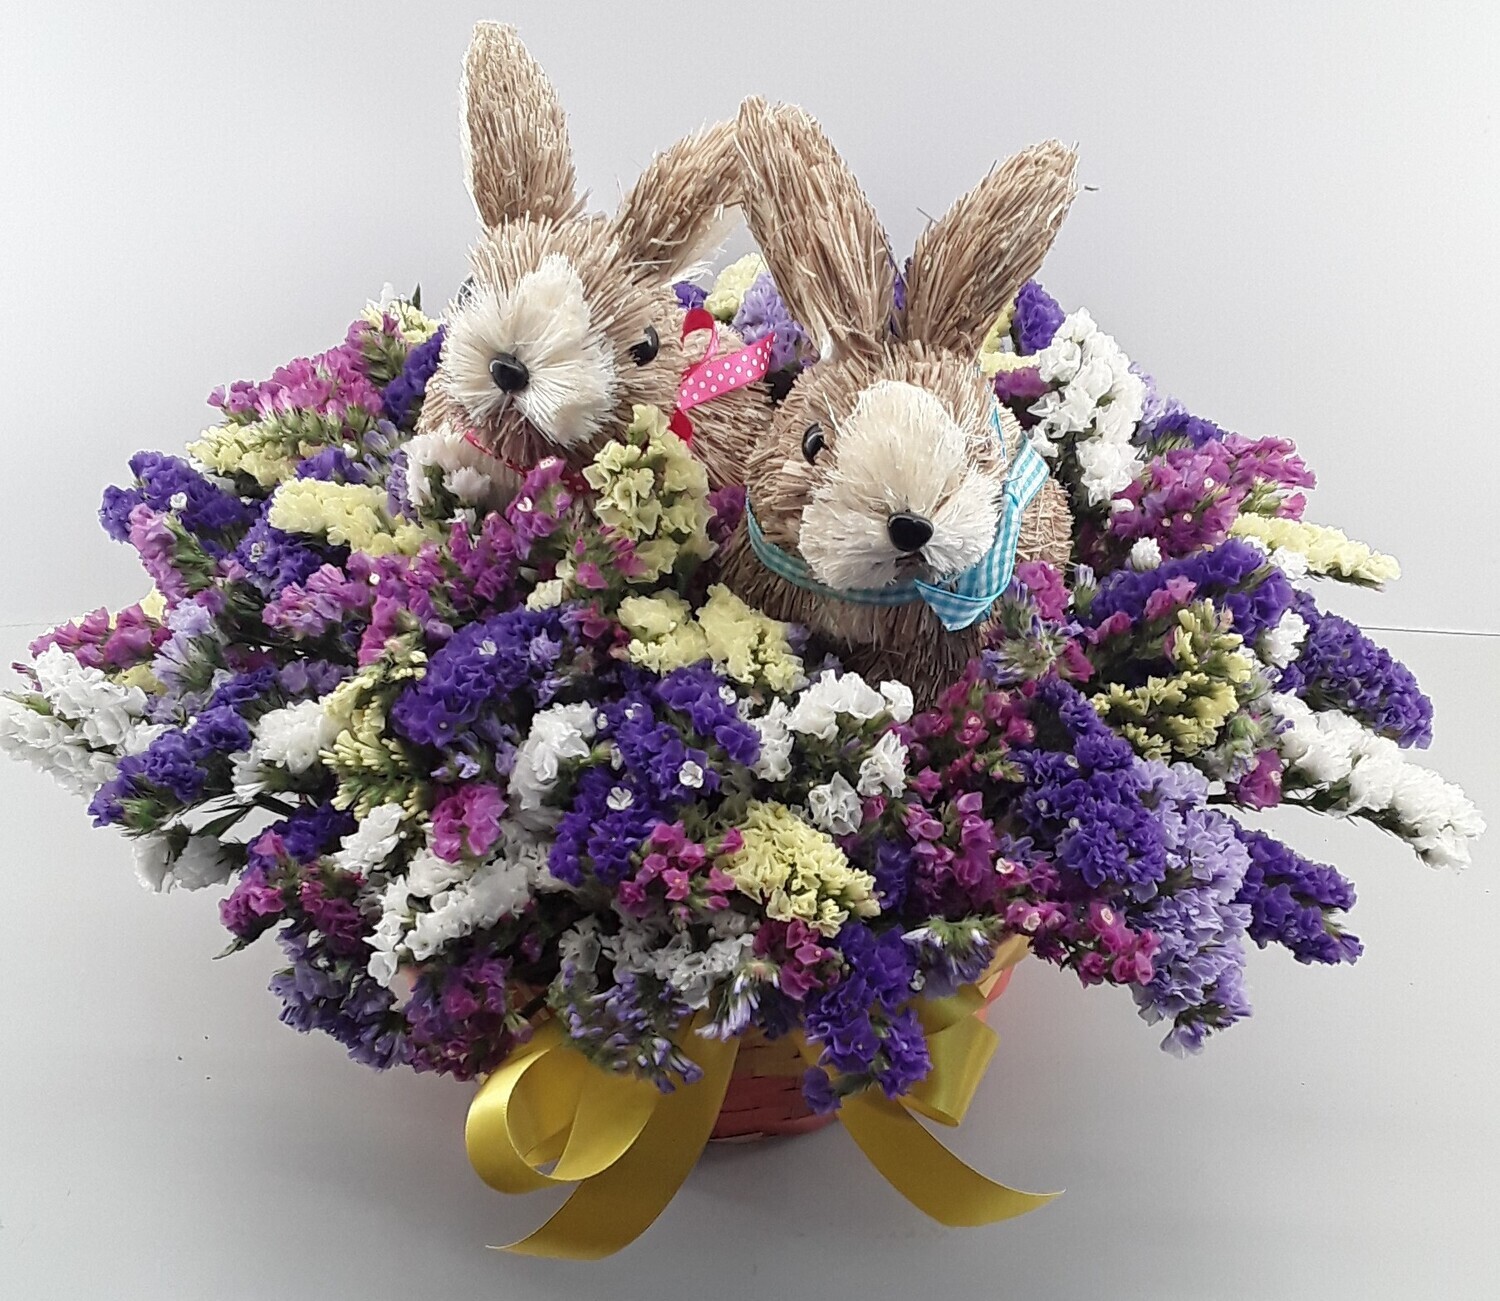 E5--Easter creation with "athanato" in a basket